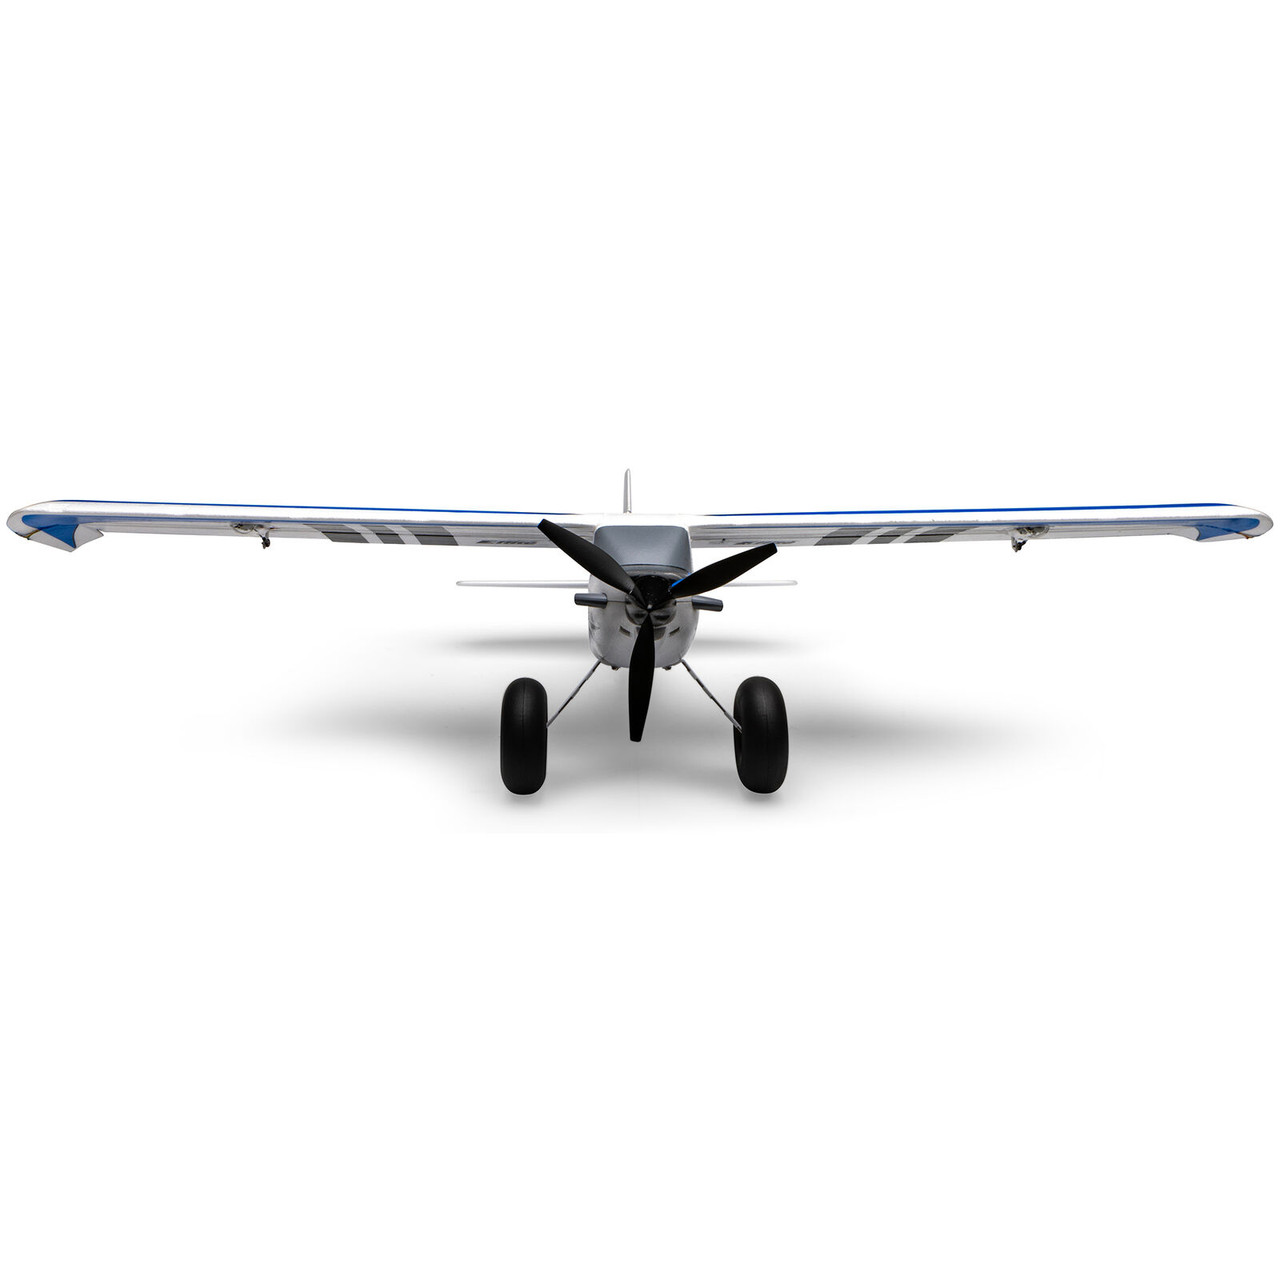 Eflite UMX Turbo Timber Evolution BNF Basic with AS3X and SAFE